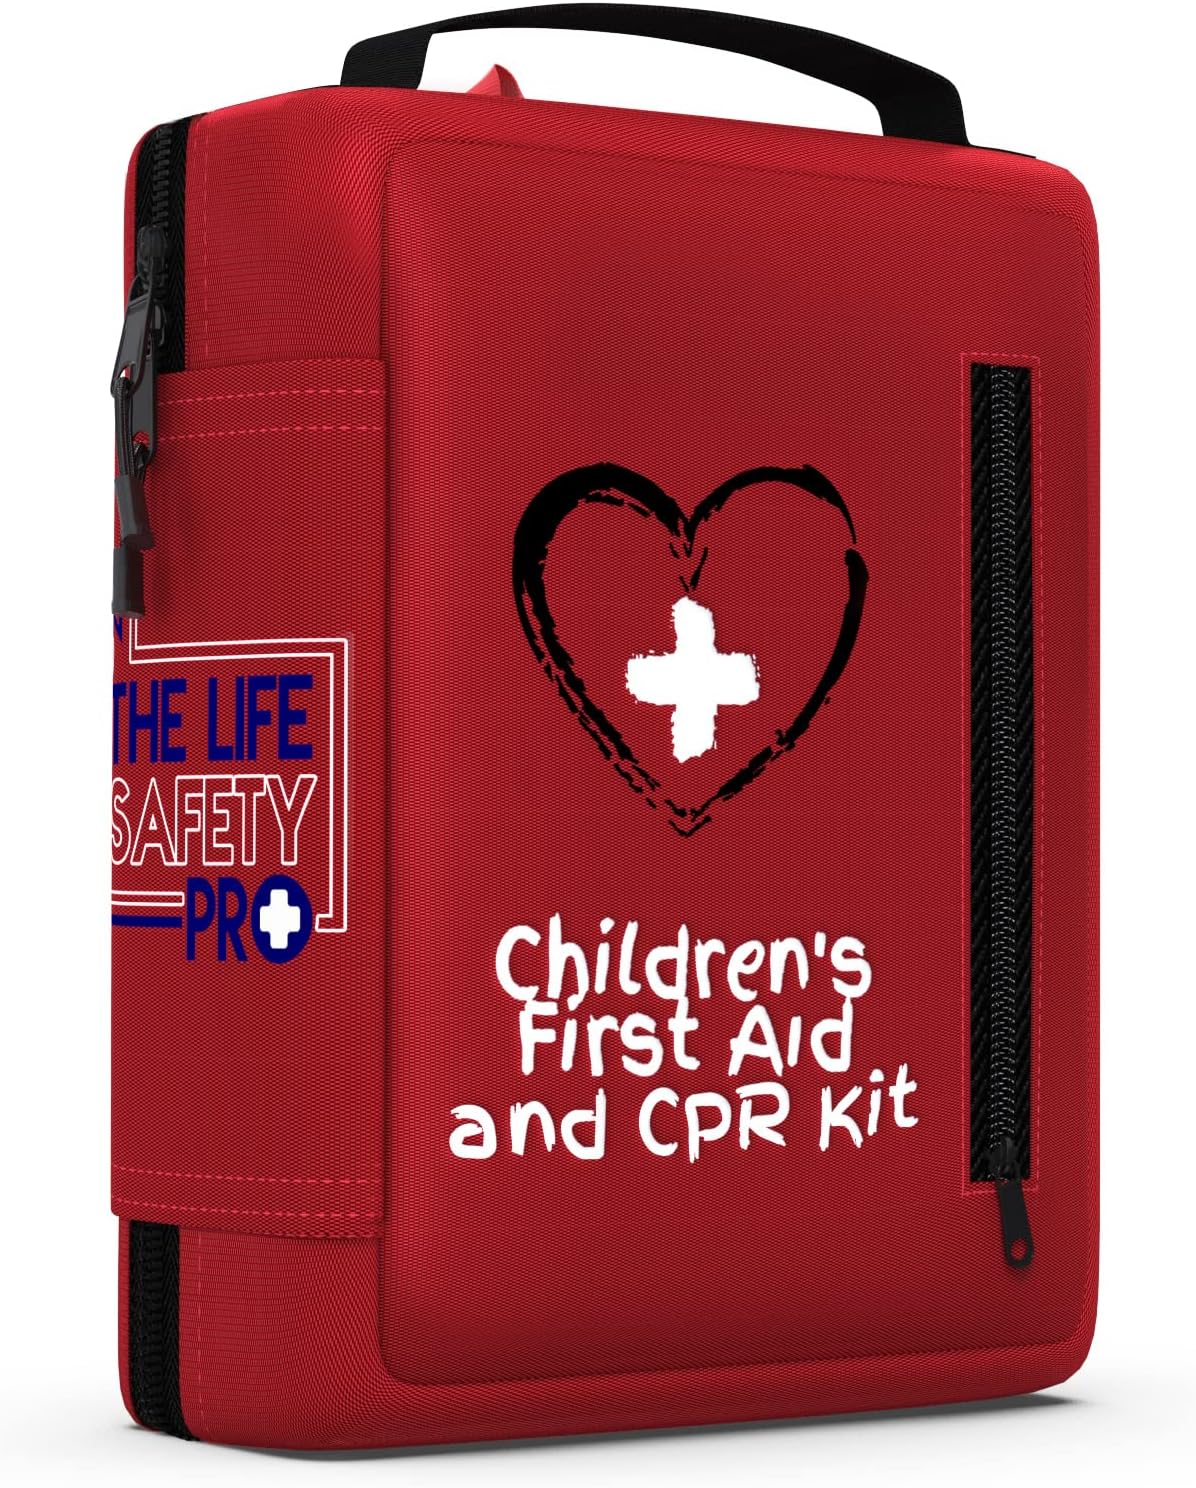 Portable First Aid and CPR Kit for Children – Ideal for Home, Car, School, Camping, and Travel. Latex-Free Bandages – Custom First Aid Guide by The Life Safety Pro